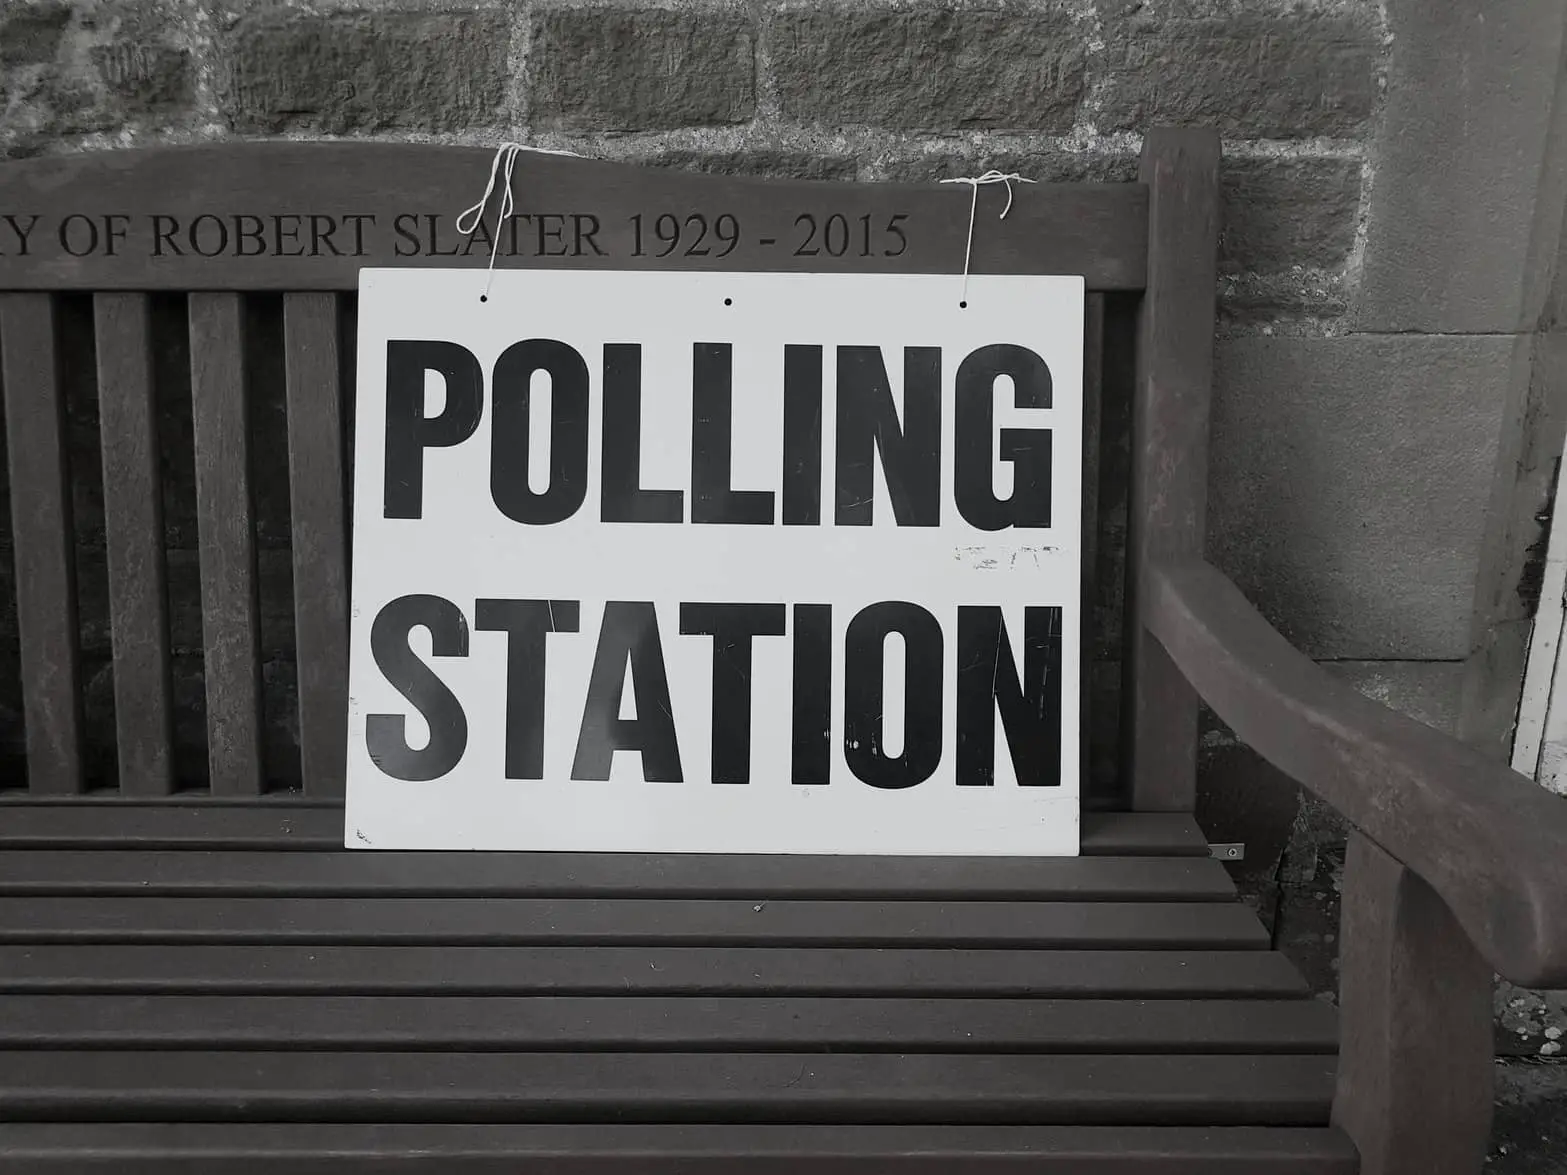 Polling station sign on a bench